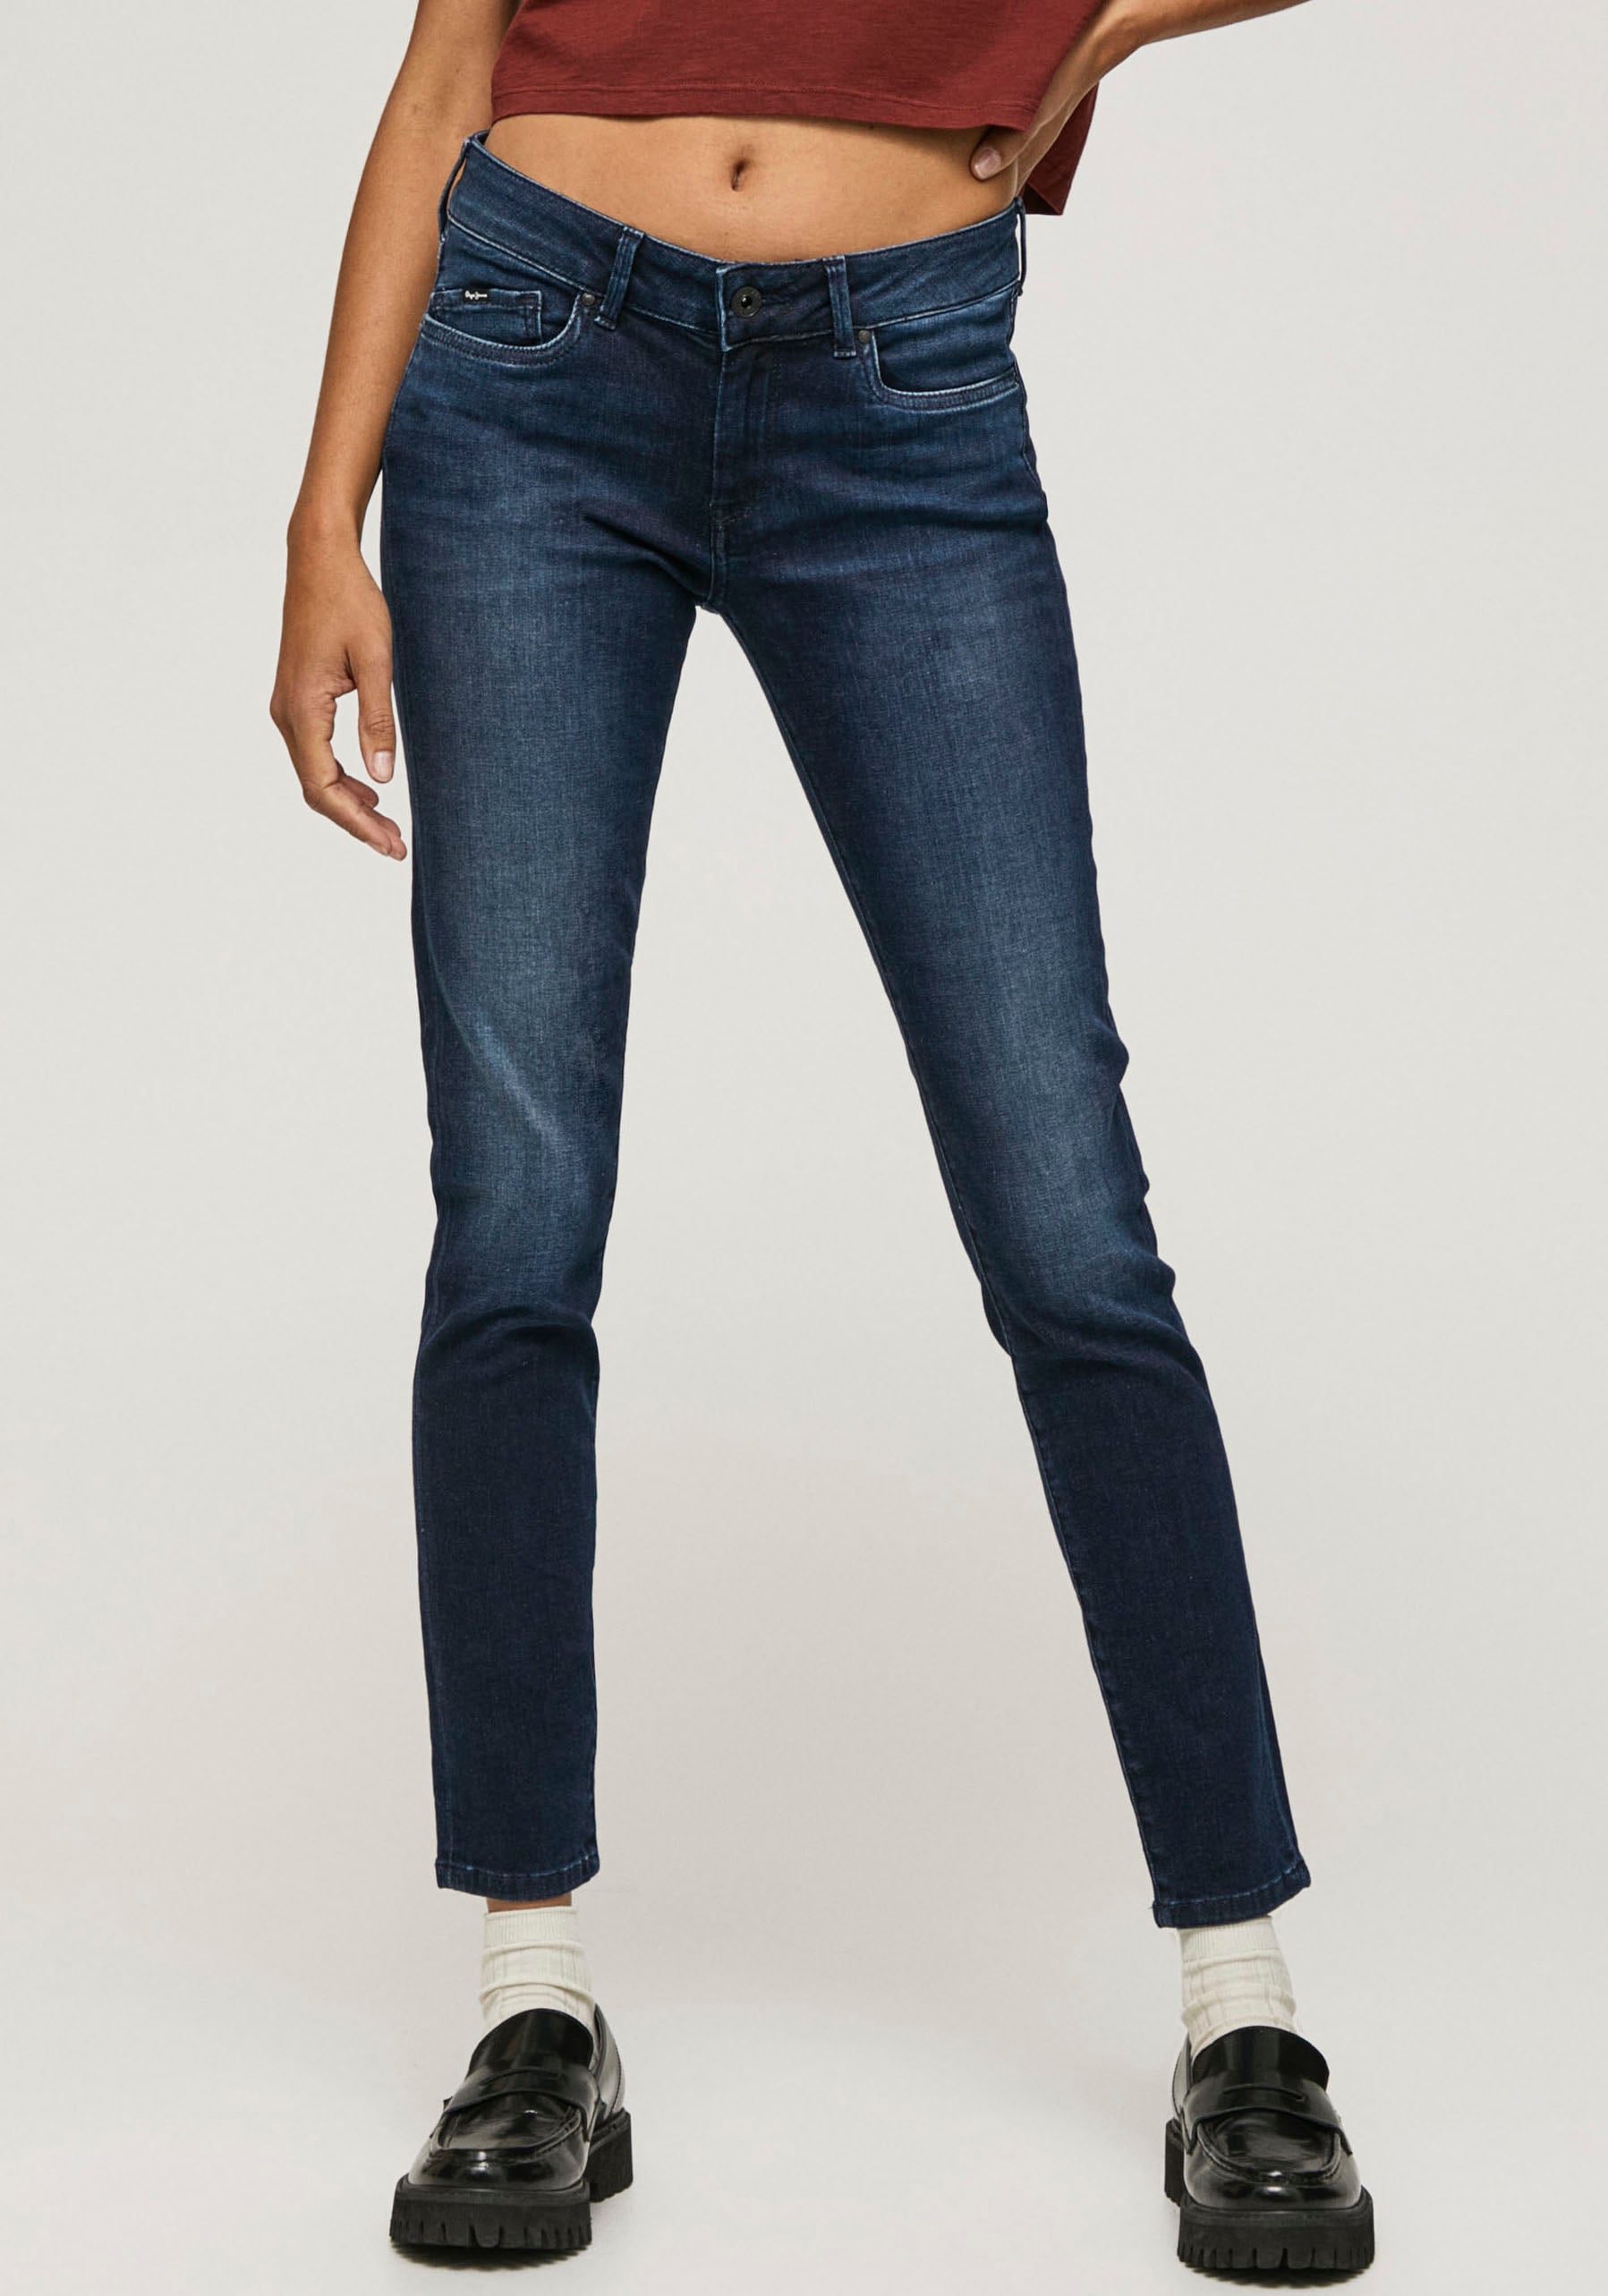 Pepe Jeans Skinny-fit-Jeans »PIXIE« von Pepe Jeans